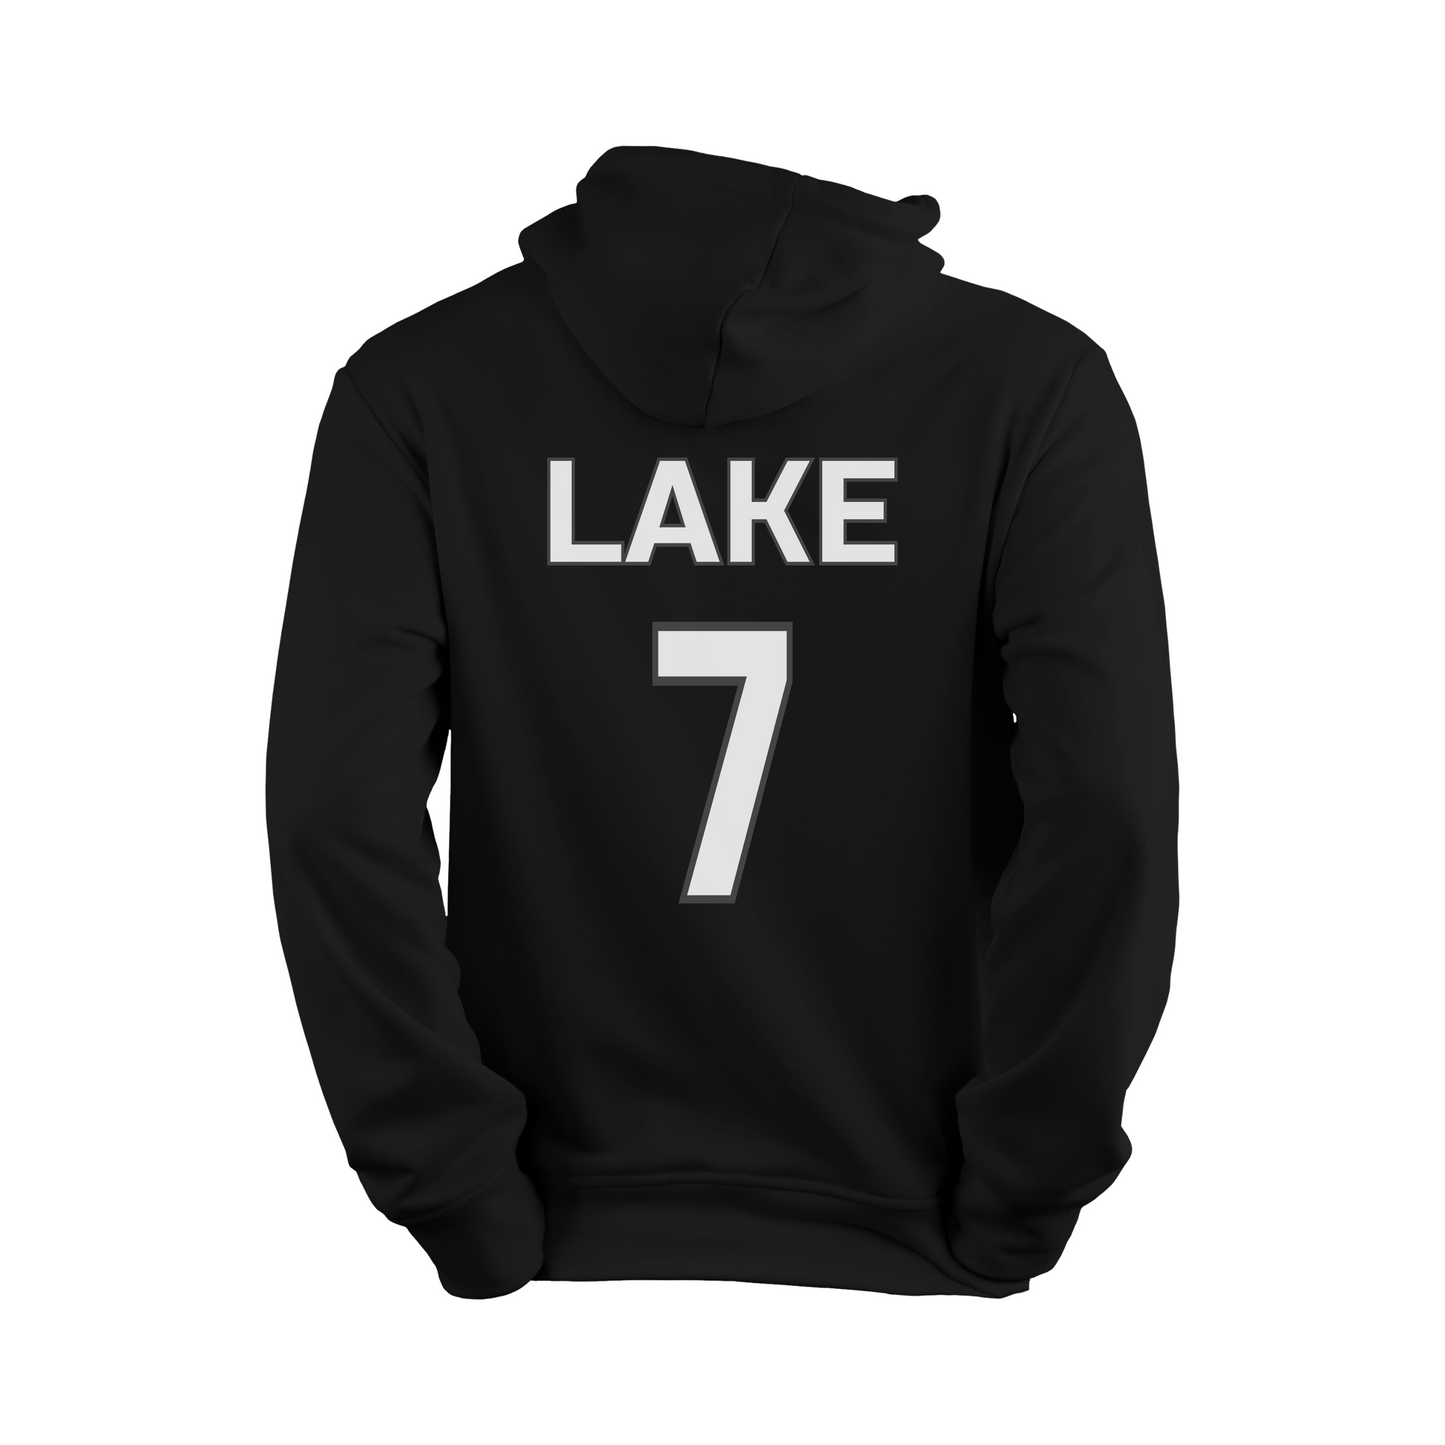 L7 JERSEY HOODIE - Limited Edition